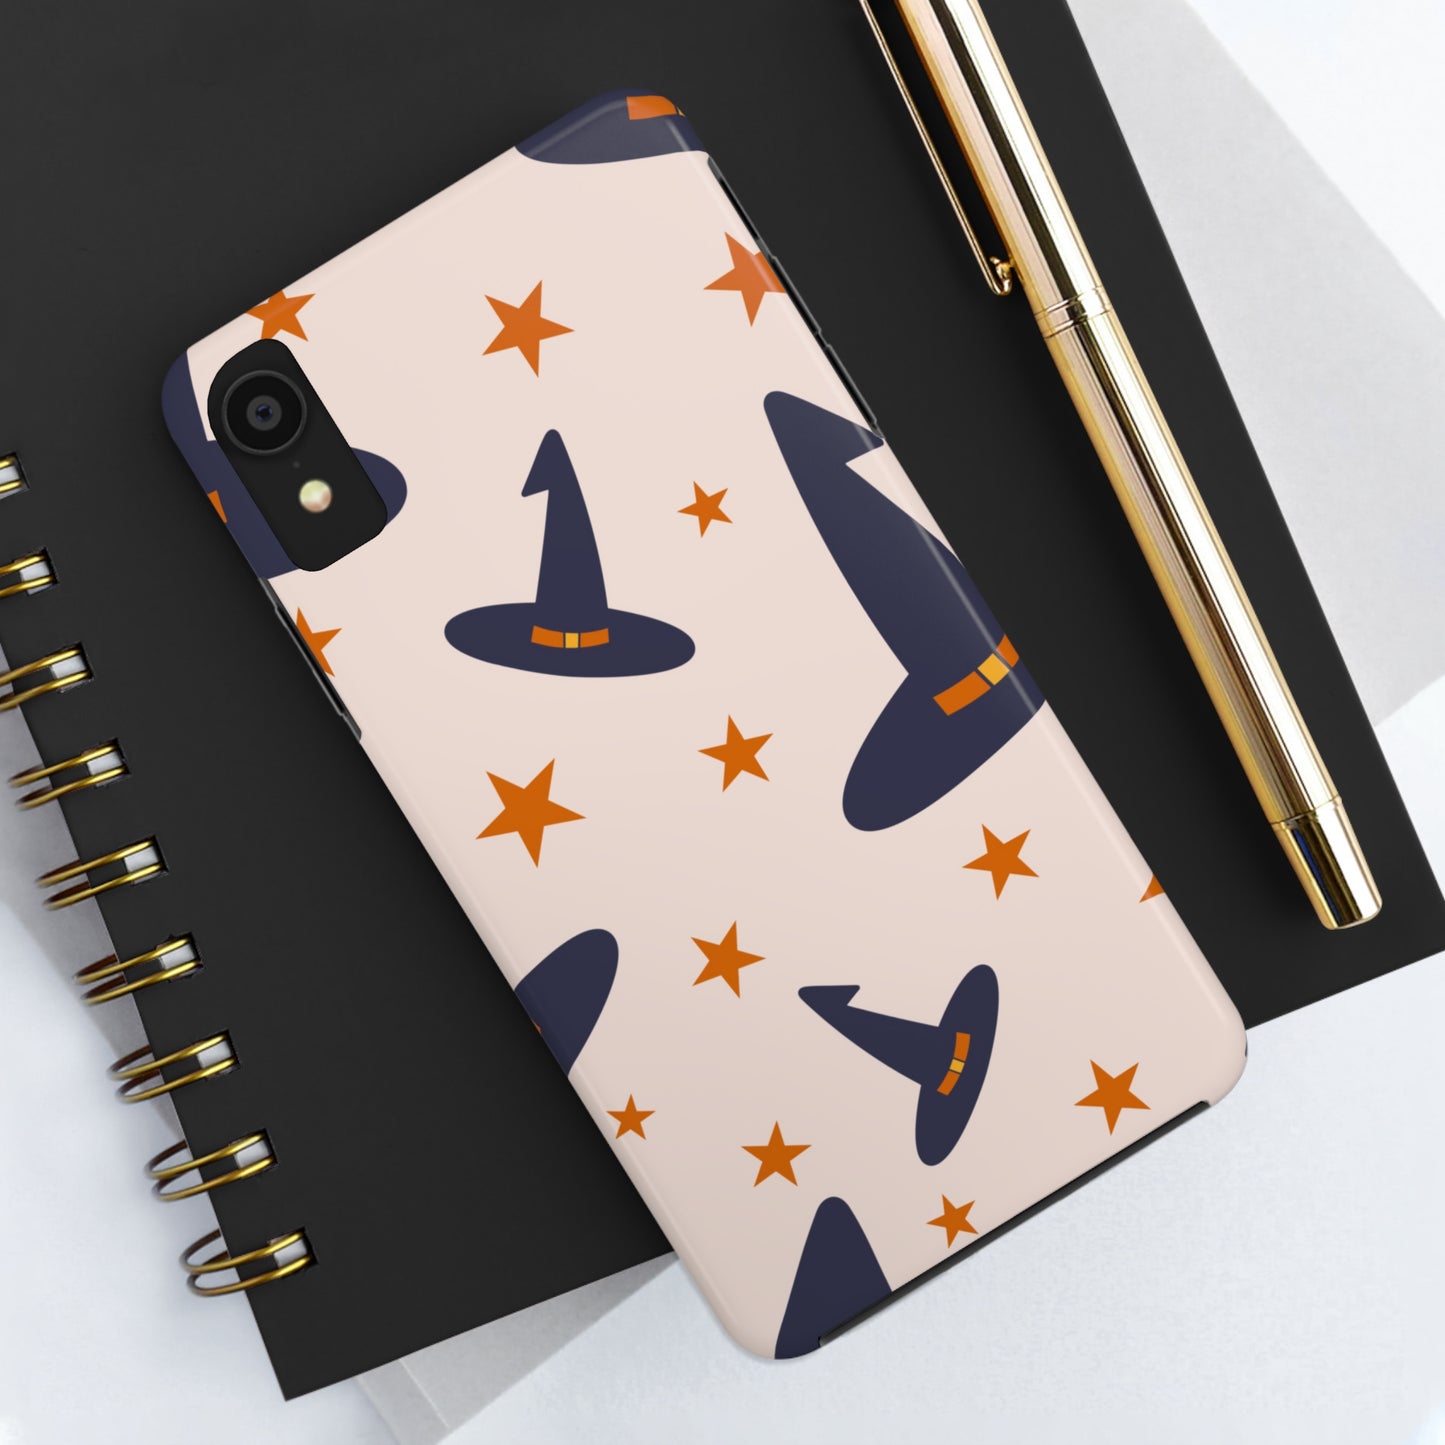 Witch Hats Halloween Phone Case